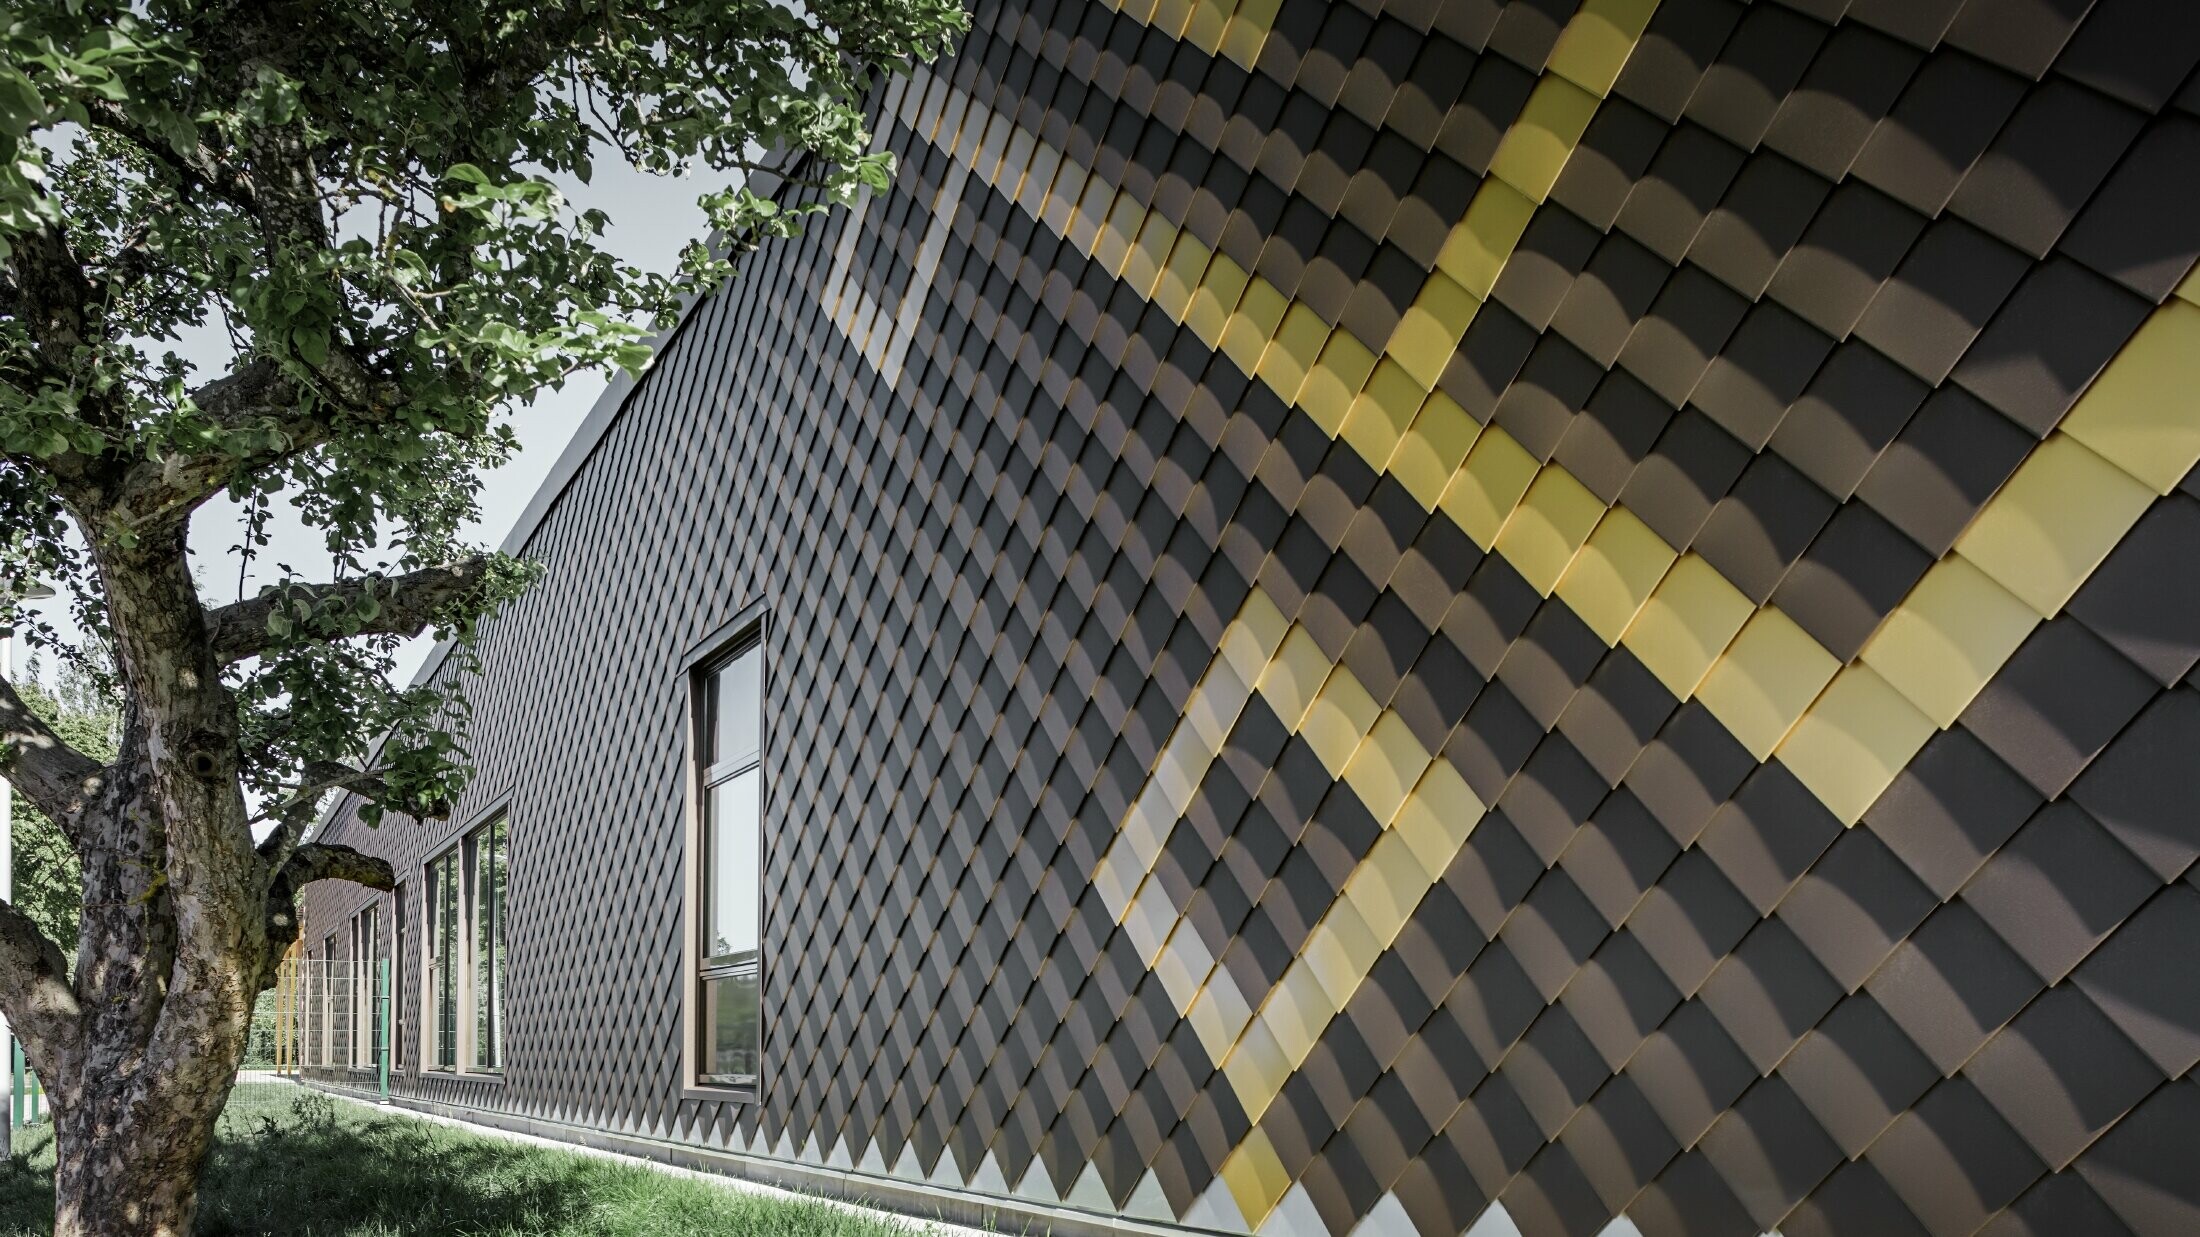 PREFA rhomboid tiles were used for the façade of the nursery school in Stockholm. The exterior façade is beautifully designed in brown and Mayan gold.